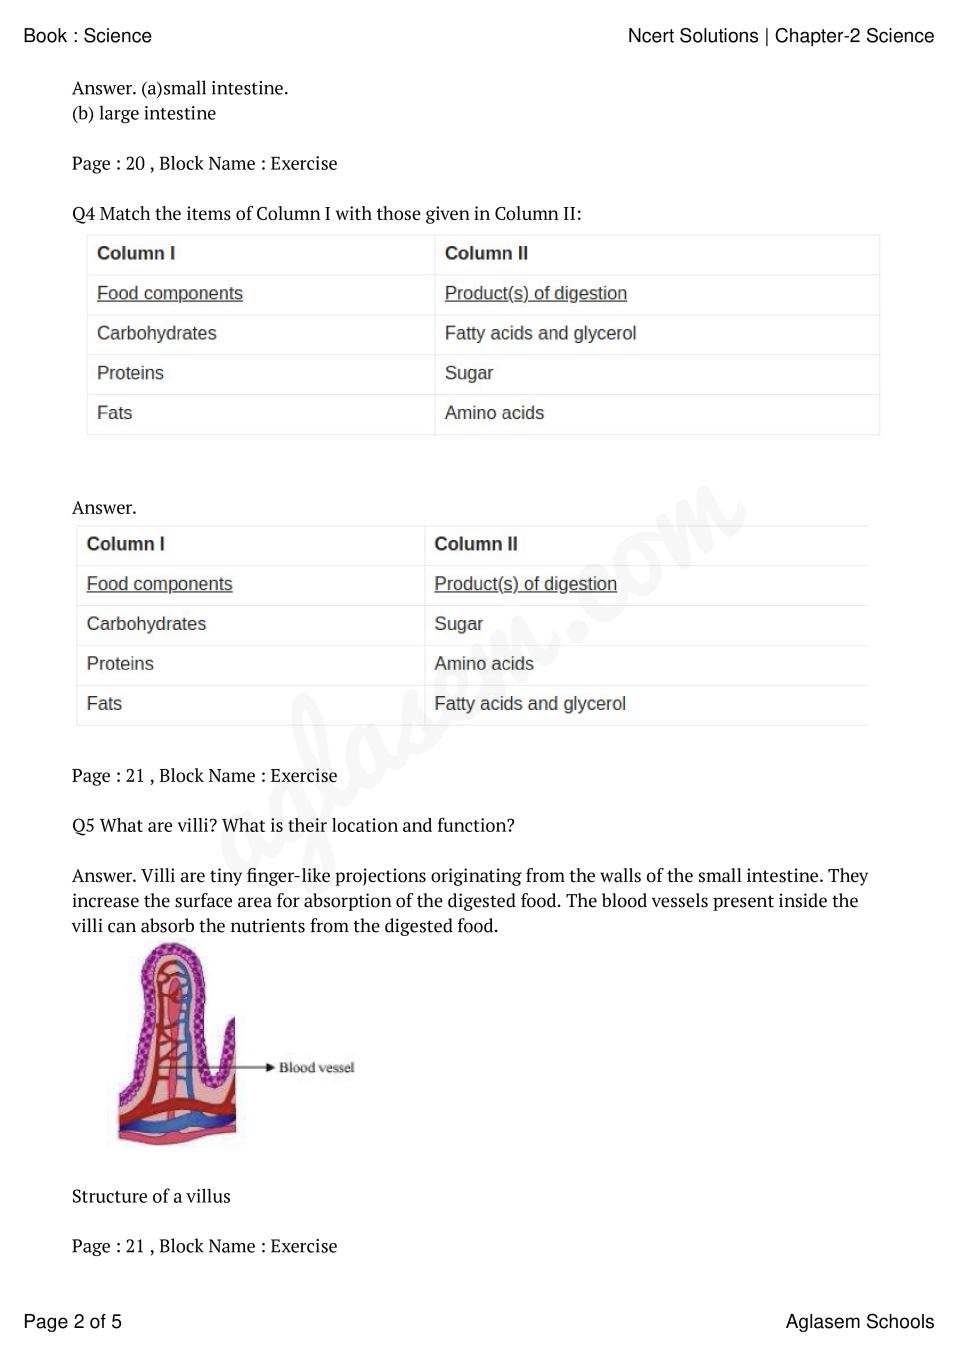 NCERT Solutions for Class 7 Science Chapter 2 Nutrition In Animals